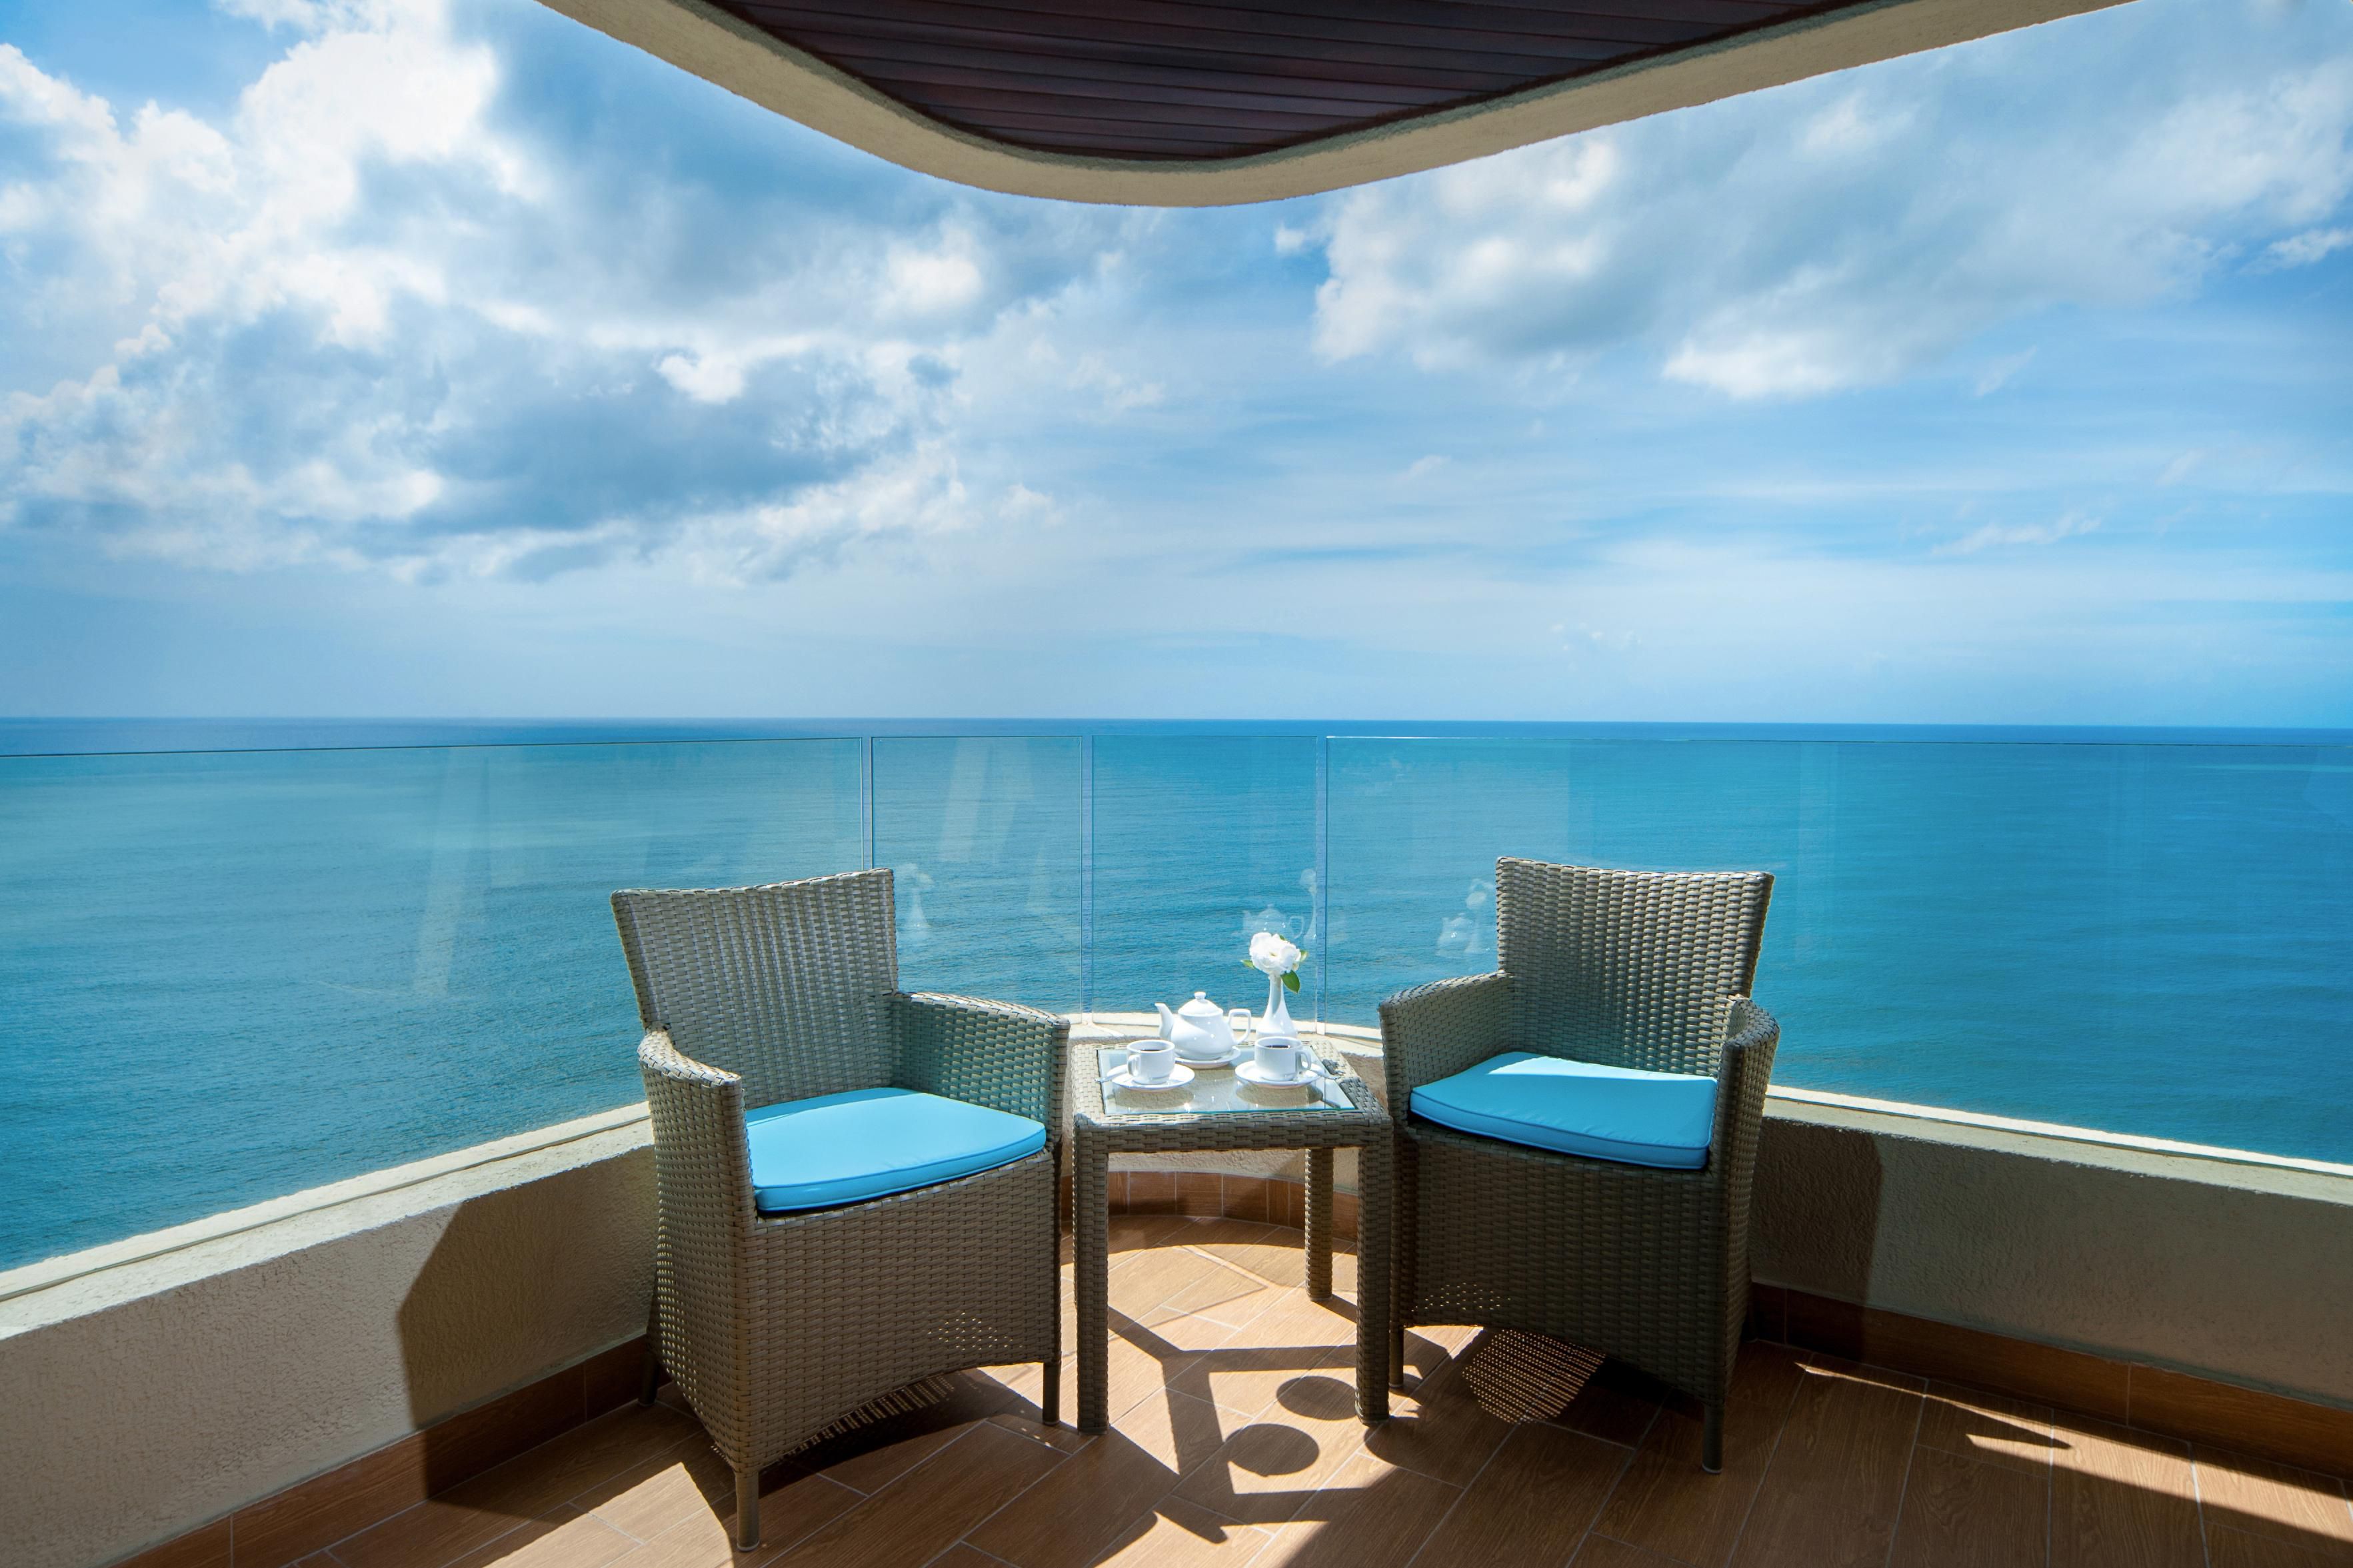 Making every stay more memorable with spectacular views.